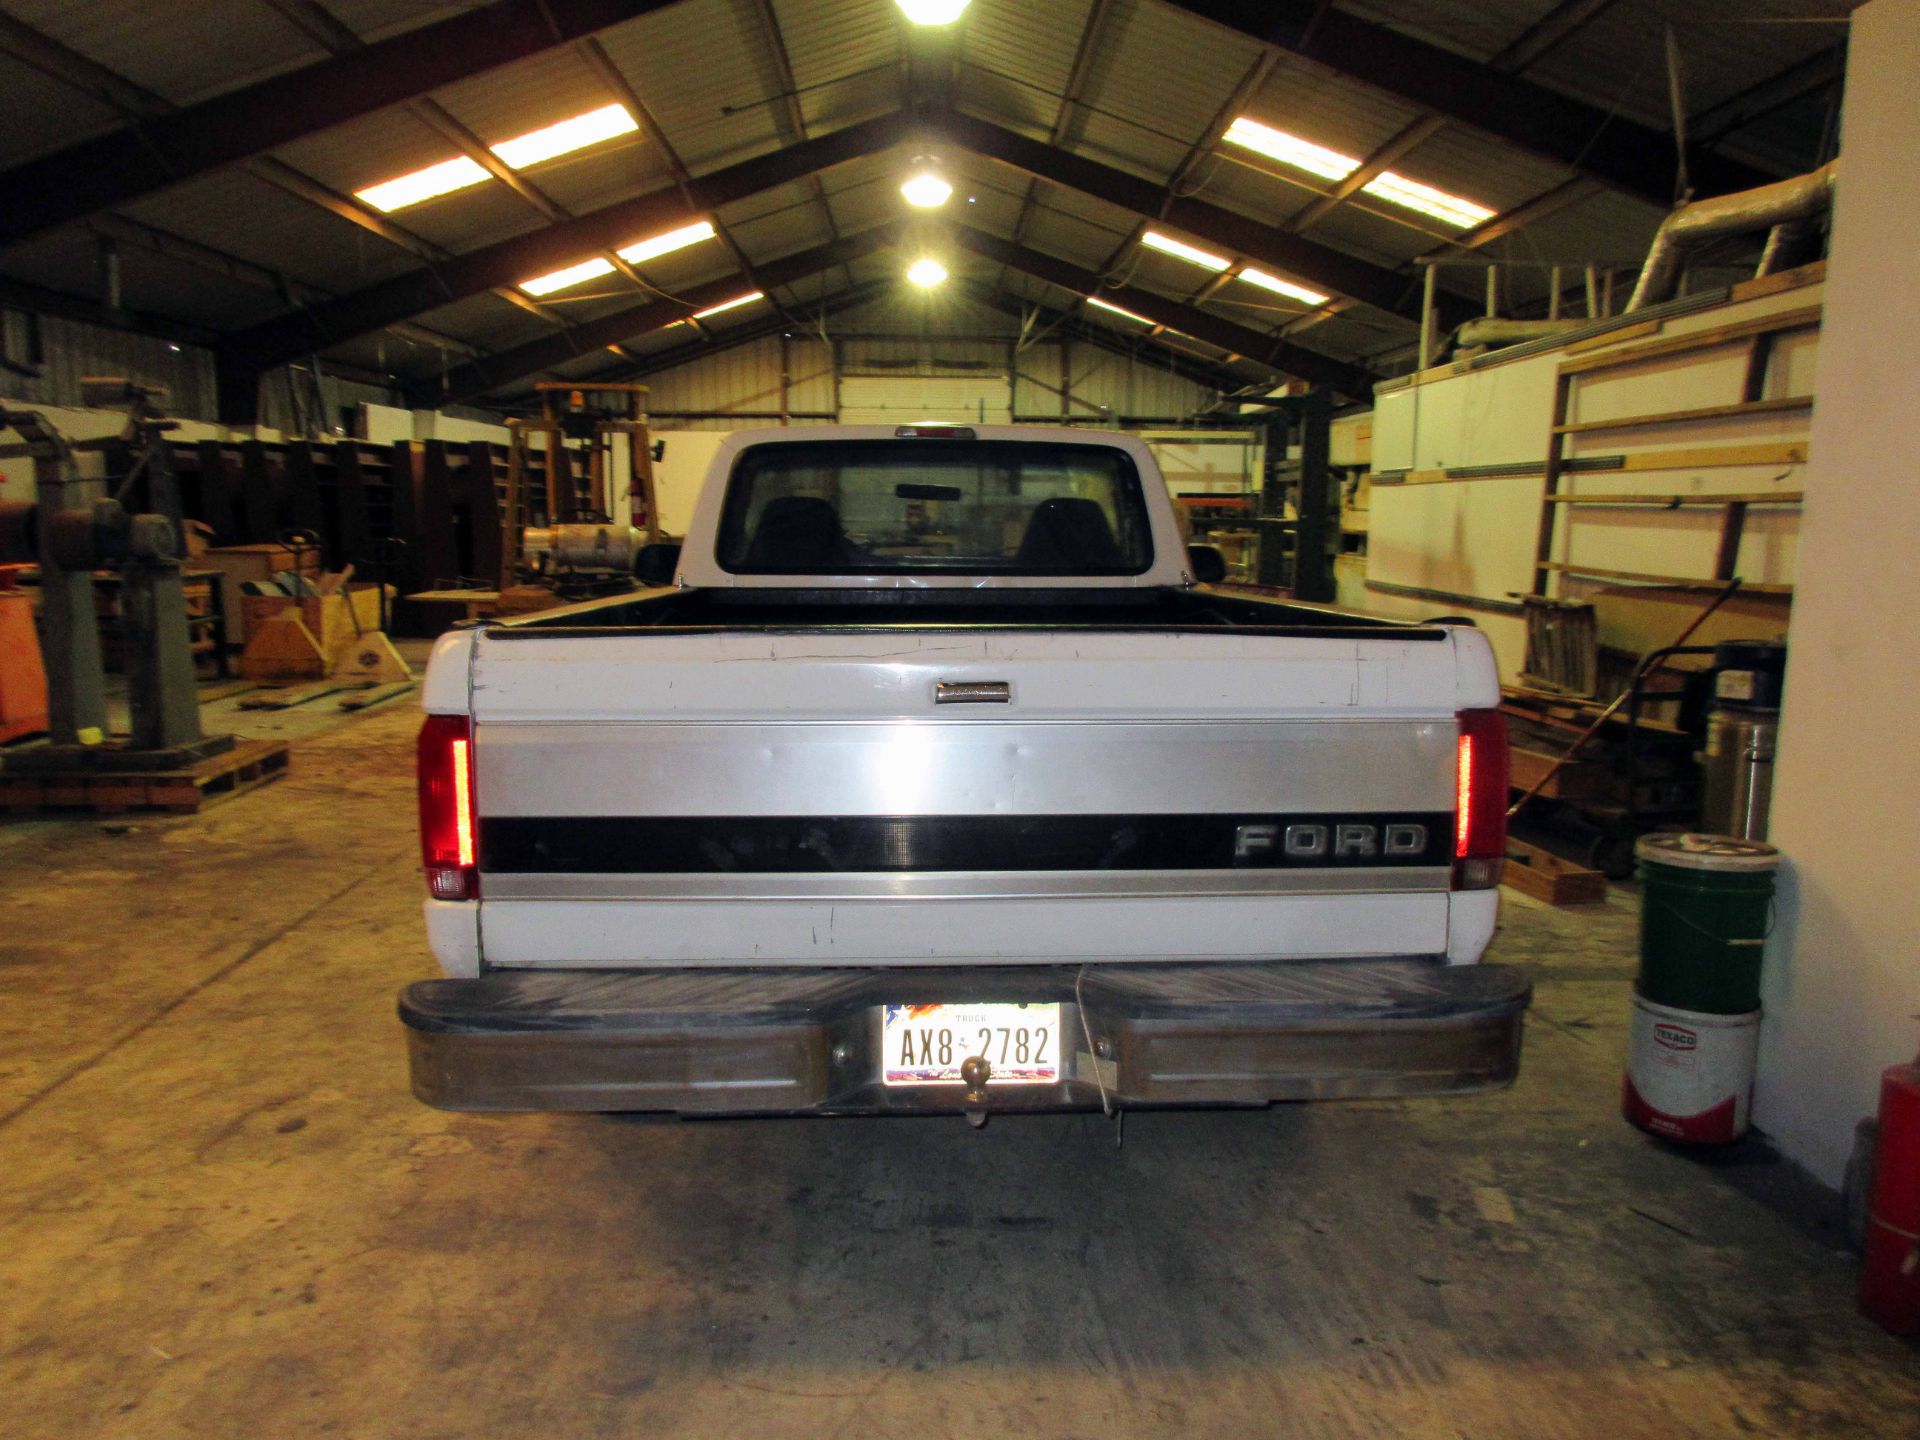 PICKUP TRUCK, 1996 FORD MDL. F150XLT, gasoline engine, auto. trans., Odo: 149,000 miles, Texas - Image 3 of 6